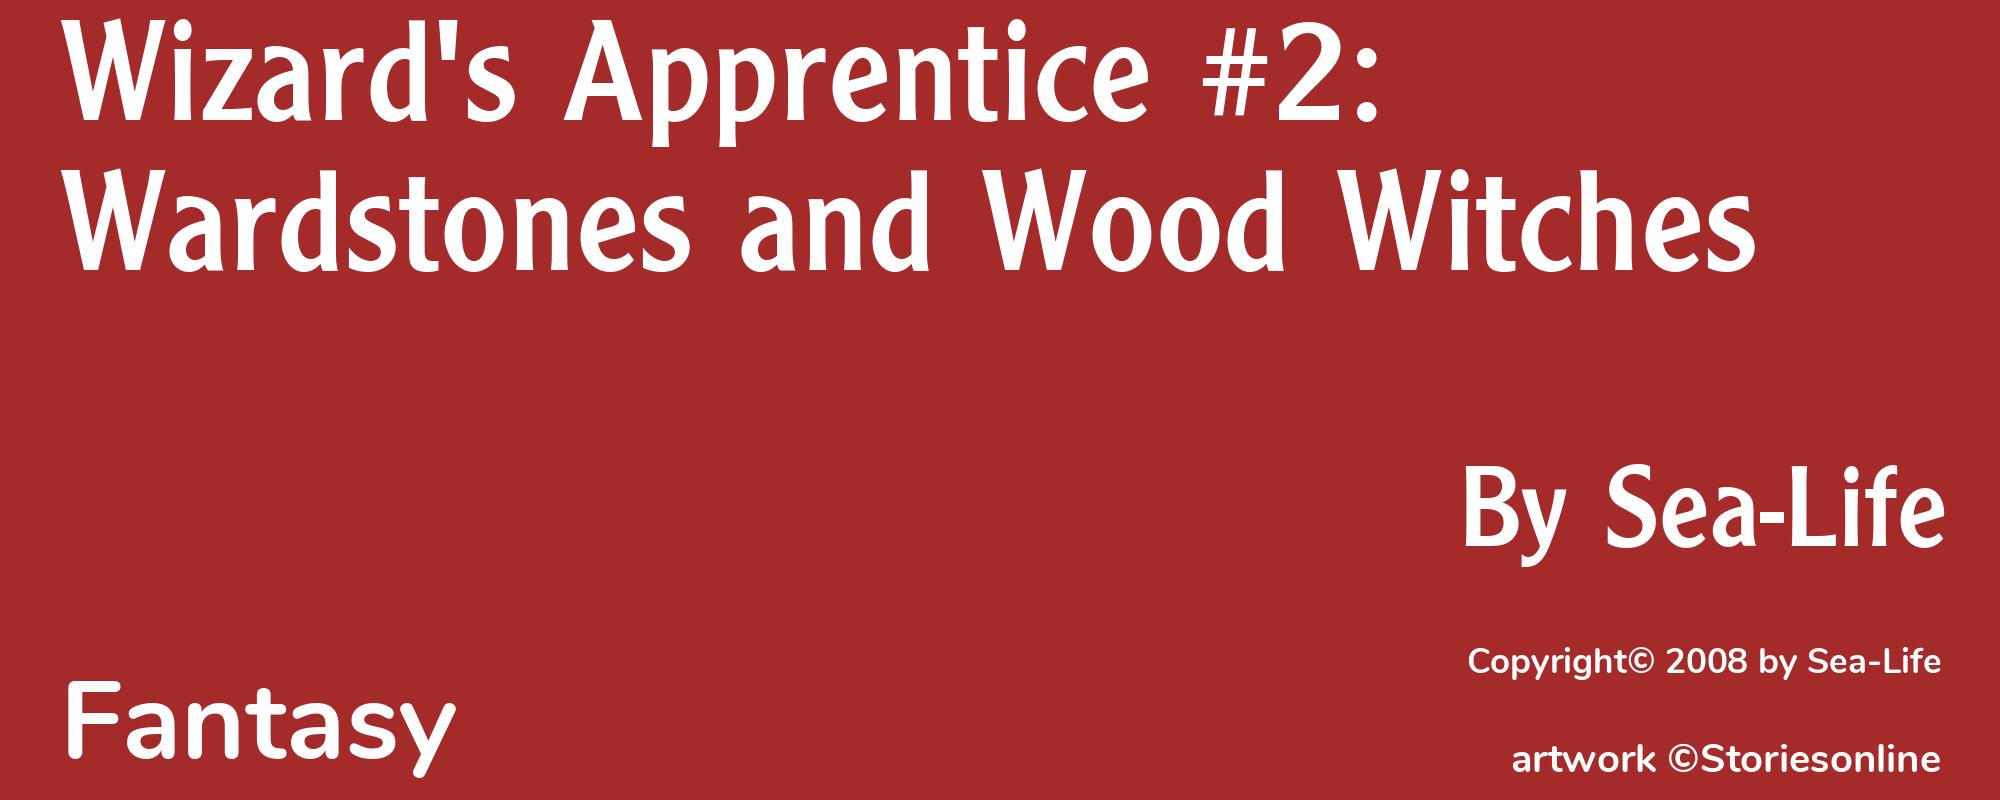 Wizard's Apprentice #2: Wardstones and Wood Witches - Cover